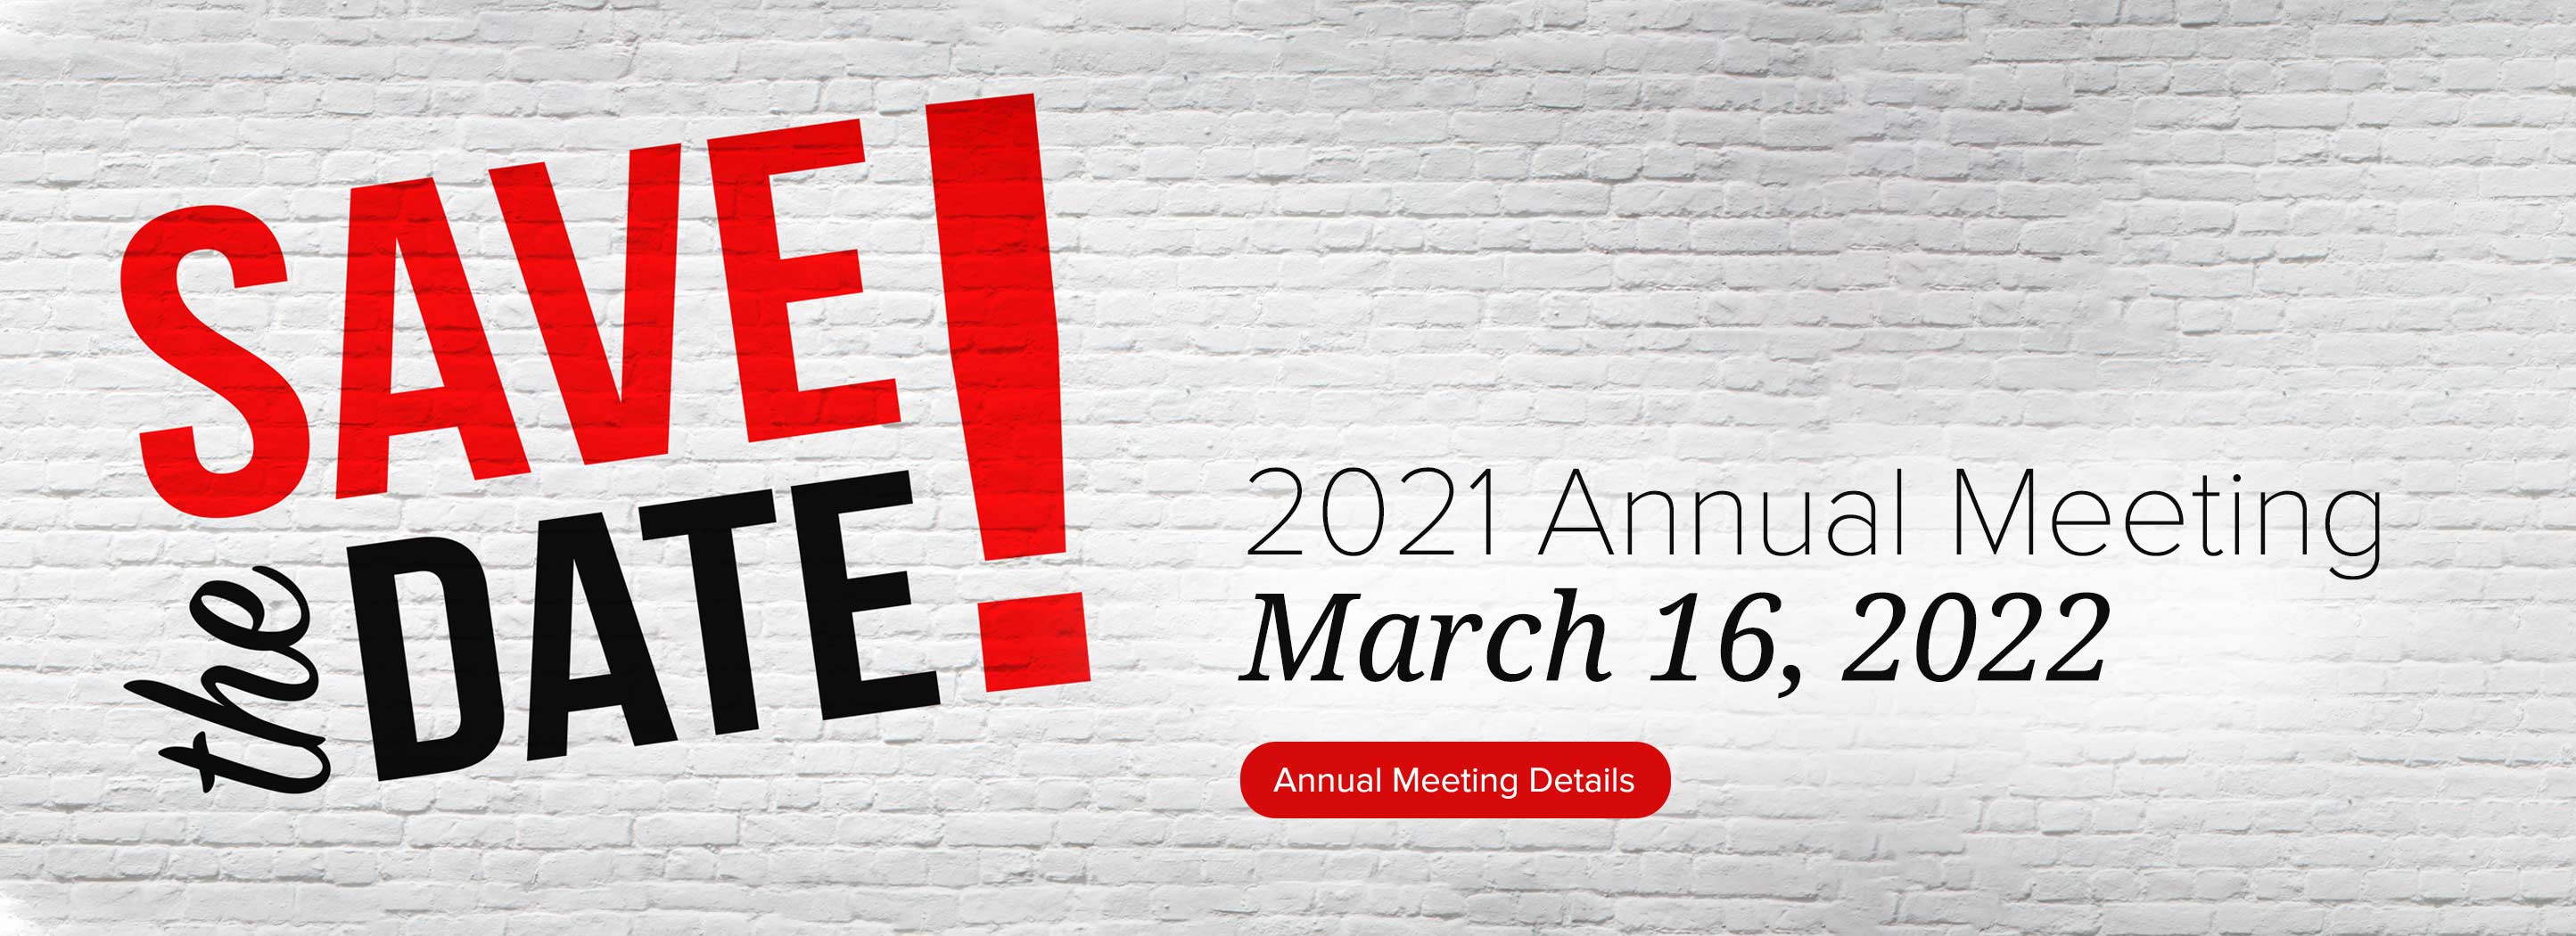 2021 Annual Meeting, March 16, 2022